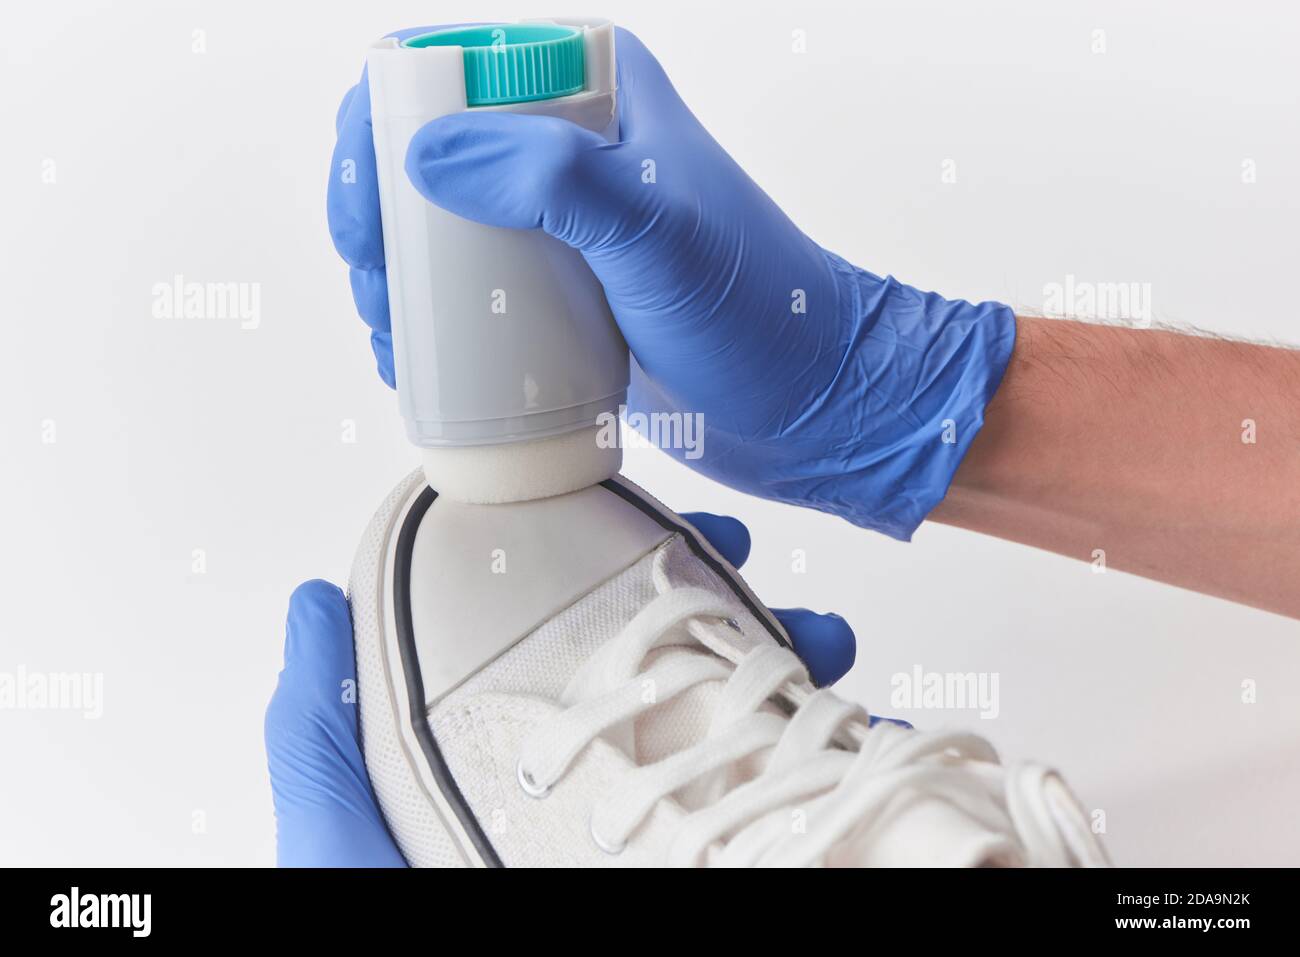 Hands in latex gloves applying white paint onto a toe cap of a canvas sneaker Stock Photo